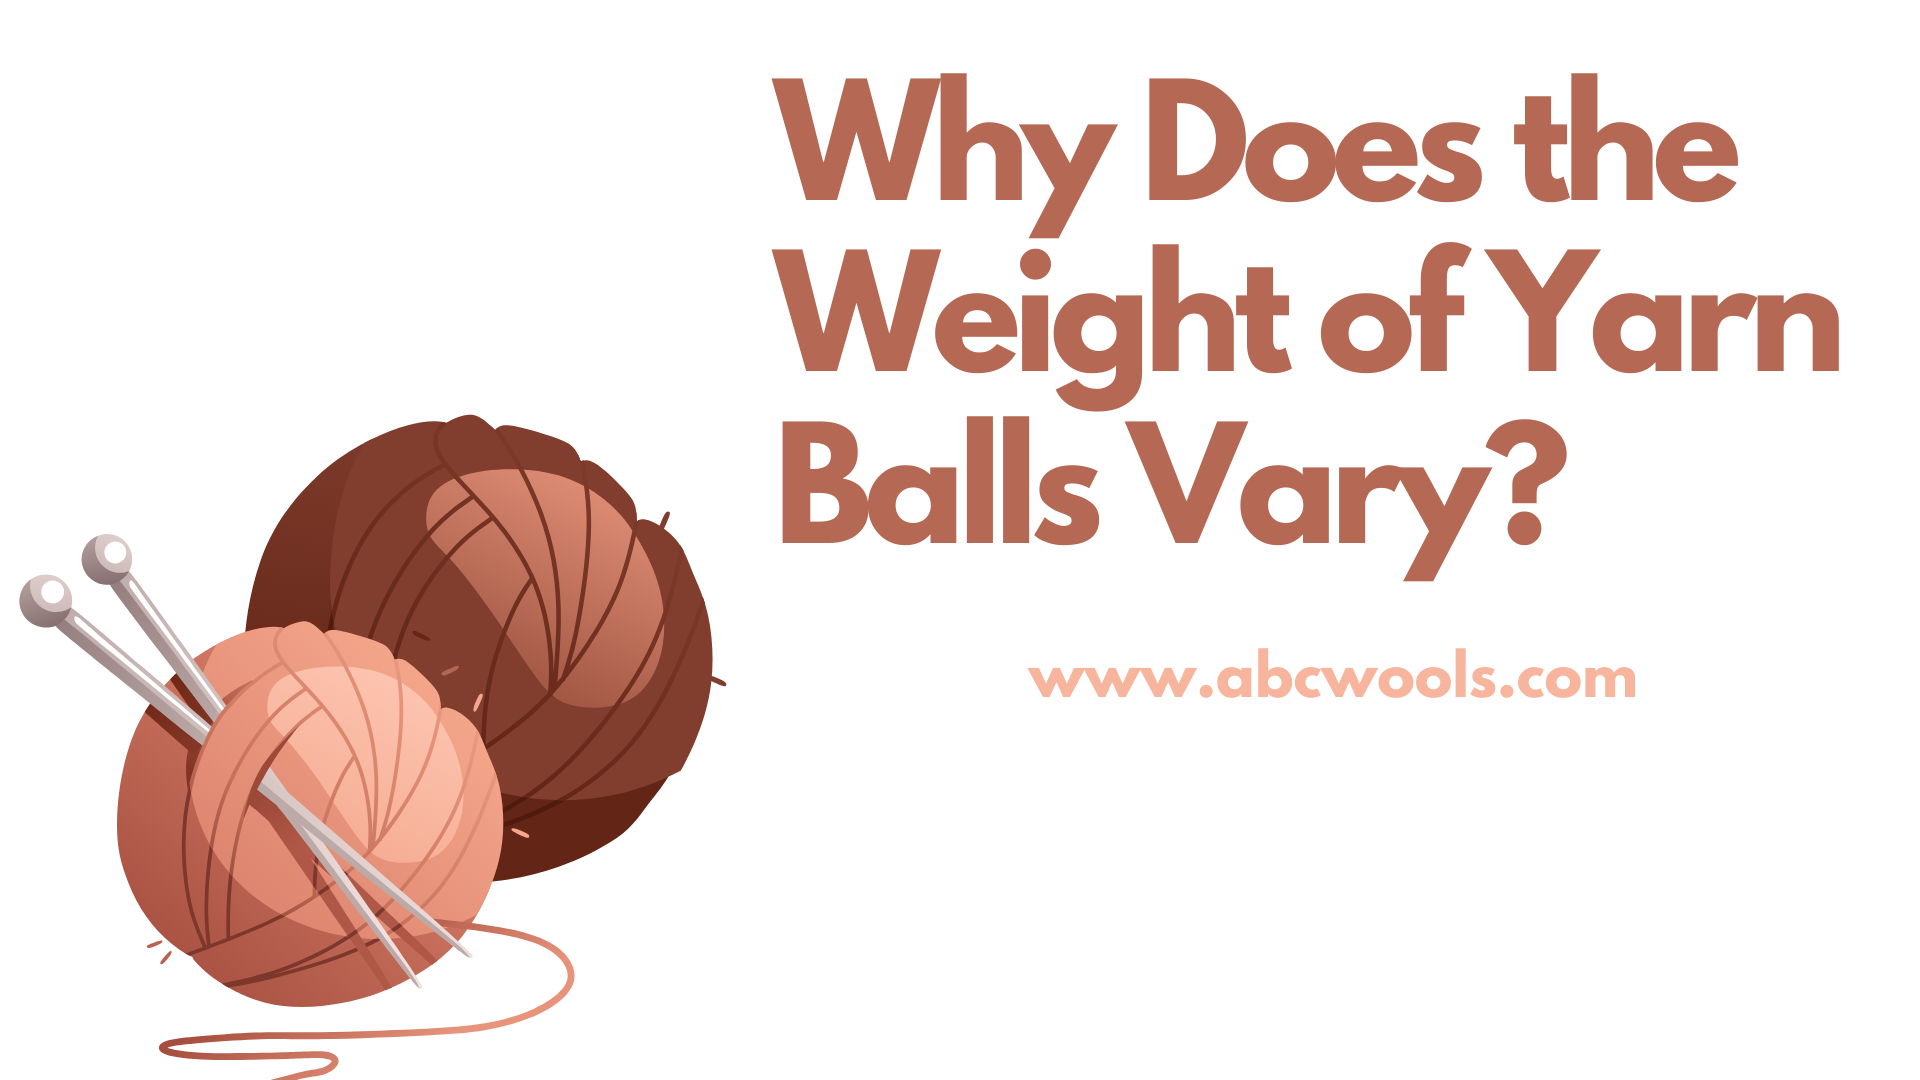 Why Does the Weight of Yarn Balls Vary?